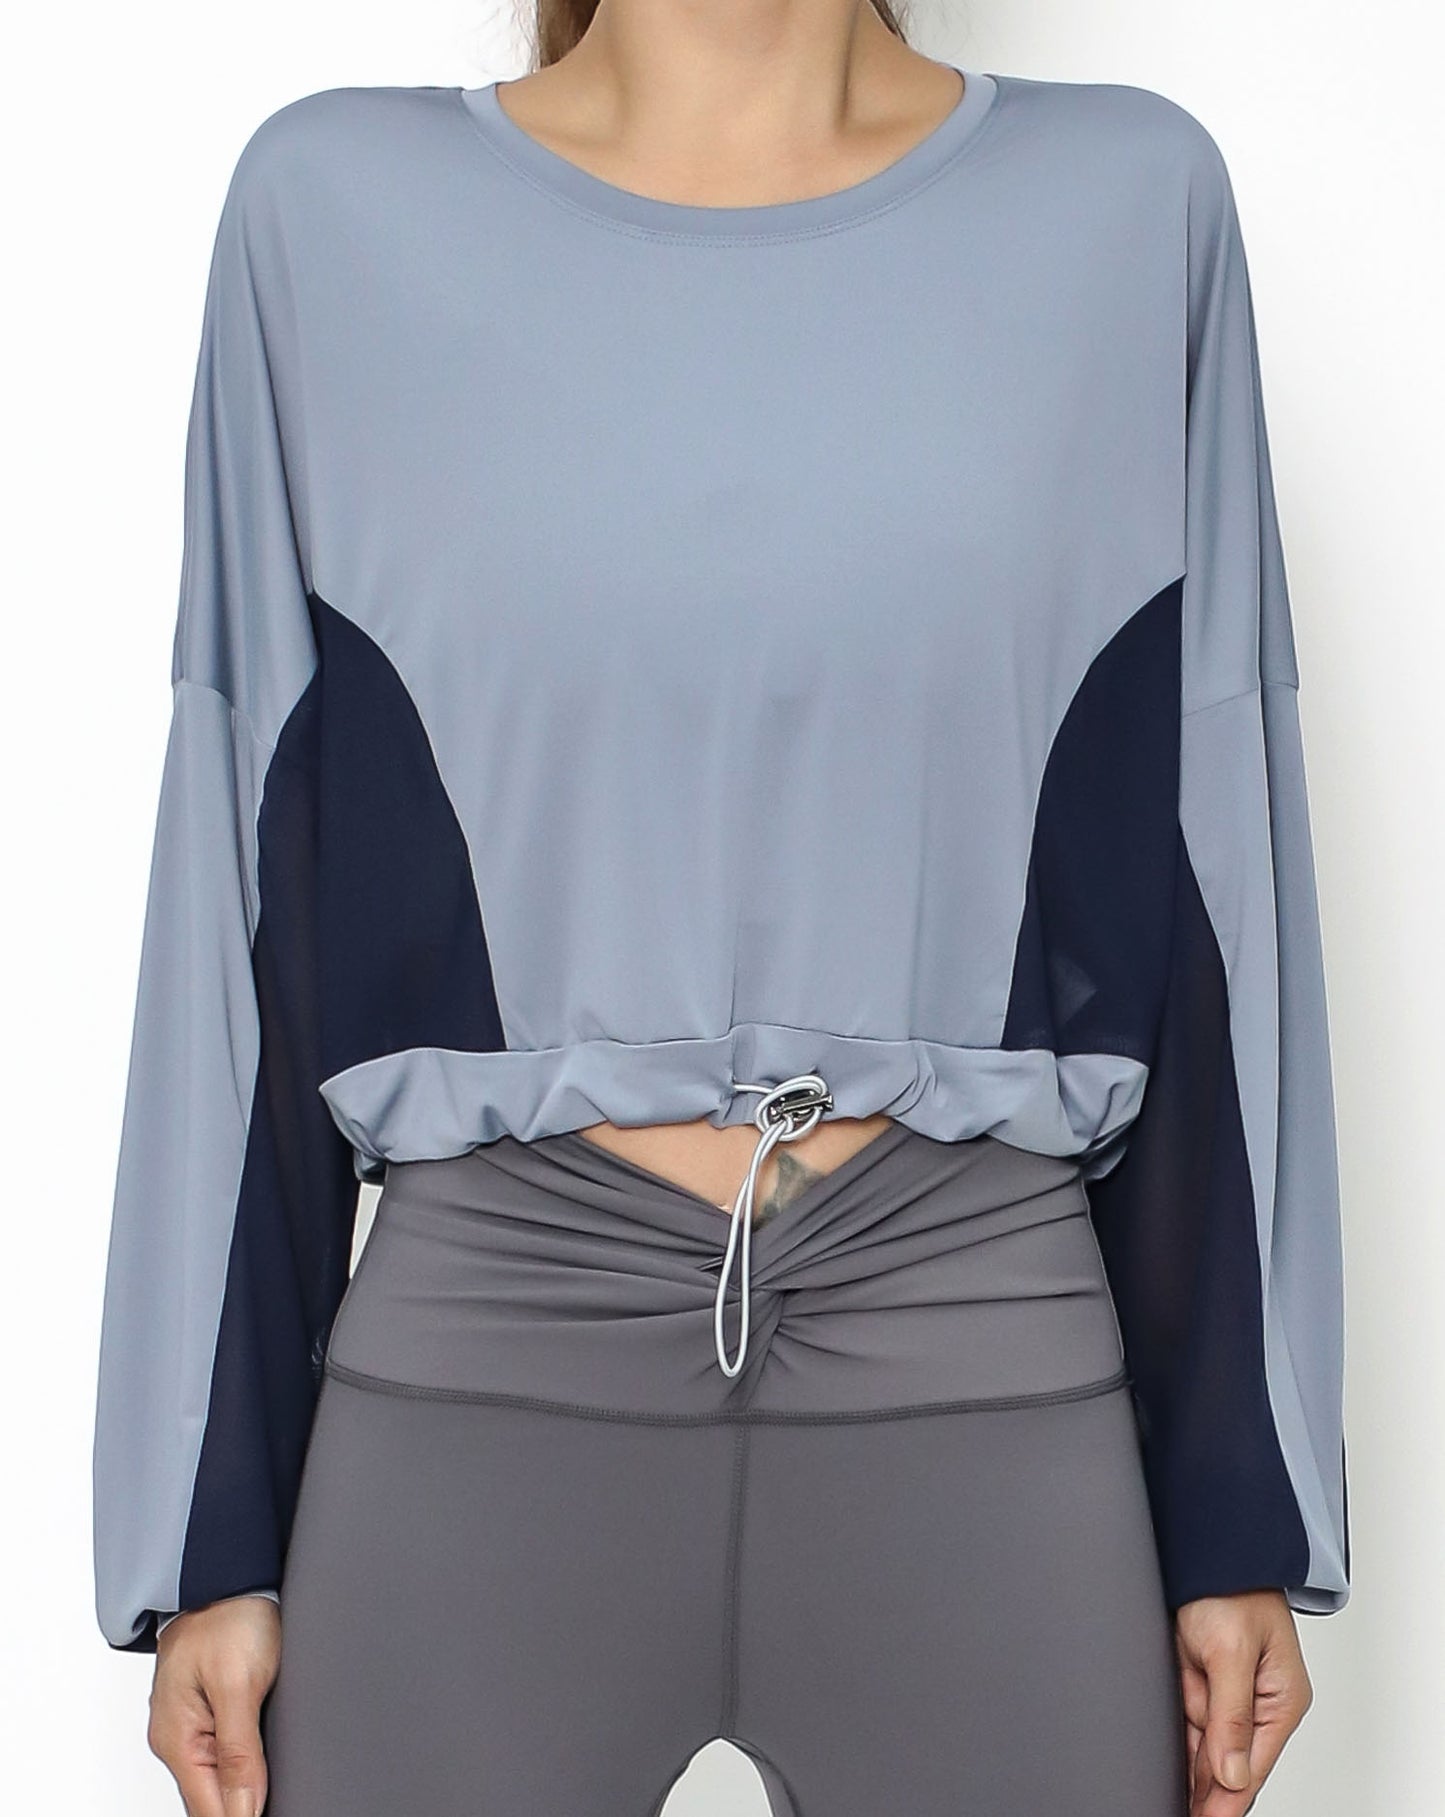 blue & navy cropped sports top *pre-order*